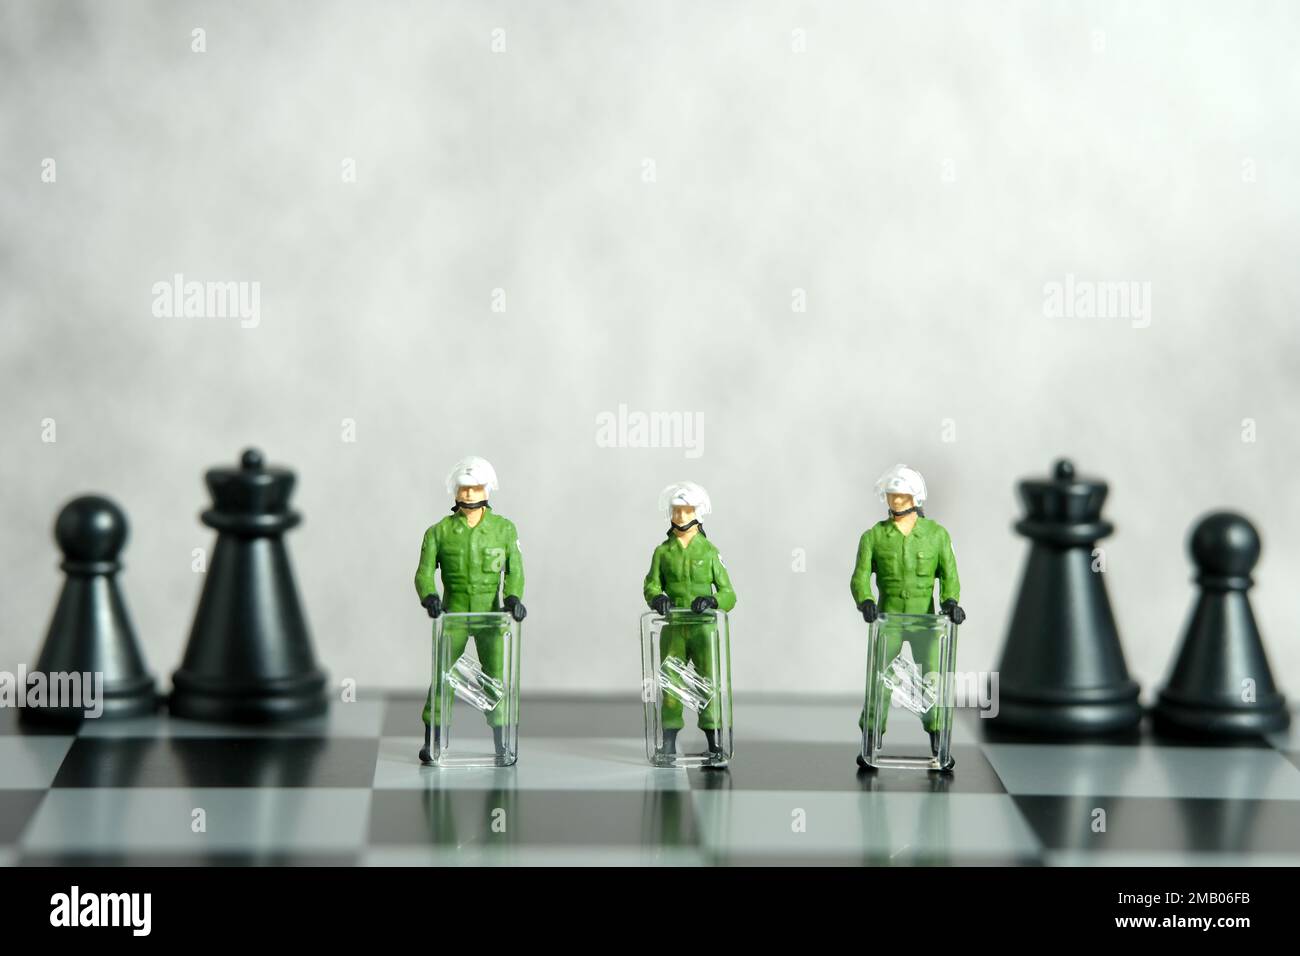 Miniature people toy figure photography. Protection strategy concept. A military anti riot armored army standing above chessboard. Image photo Stock Photo